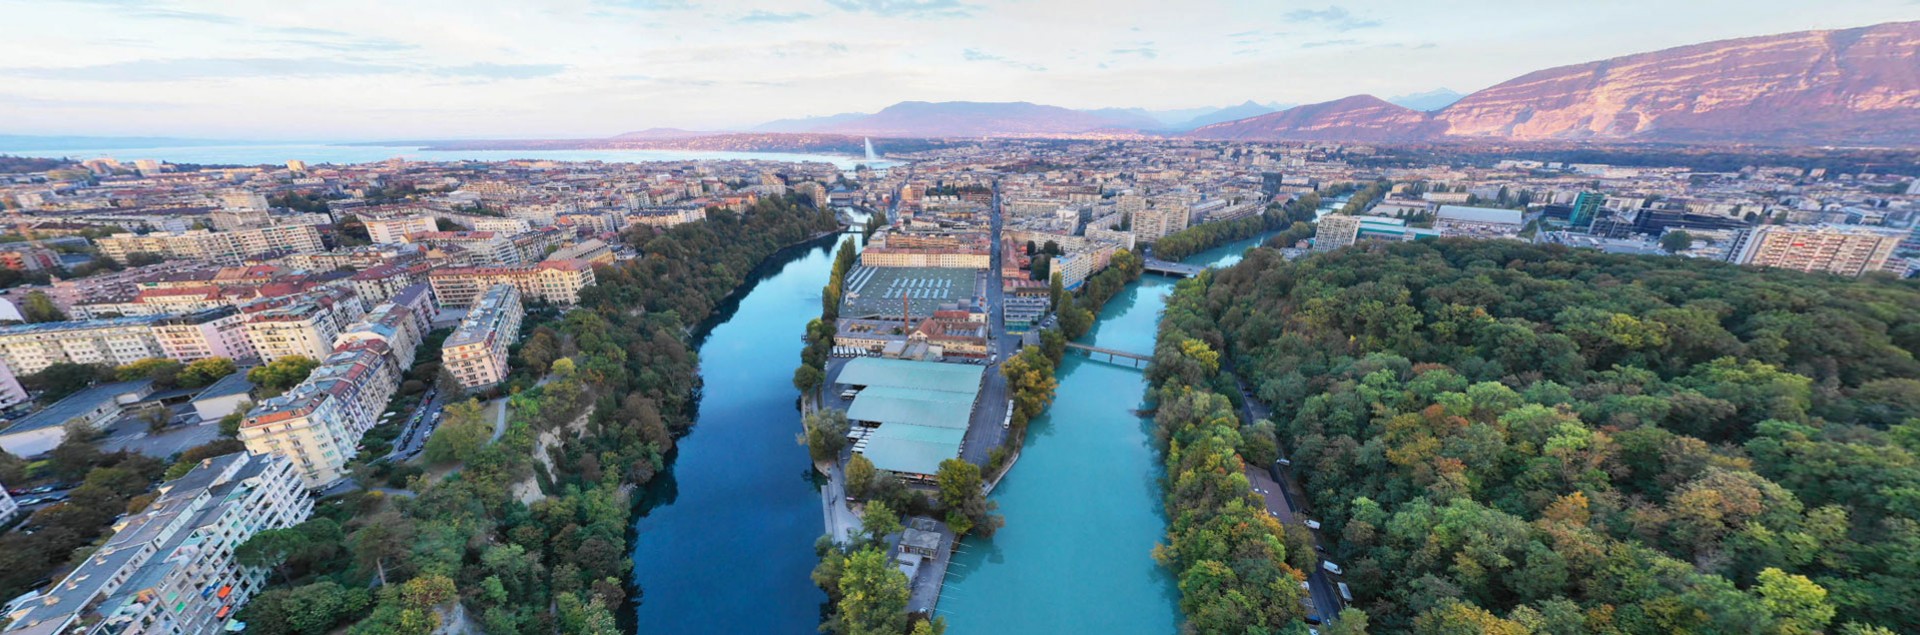 photo drone geneve banner home agence immobiliere locations ventes